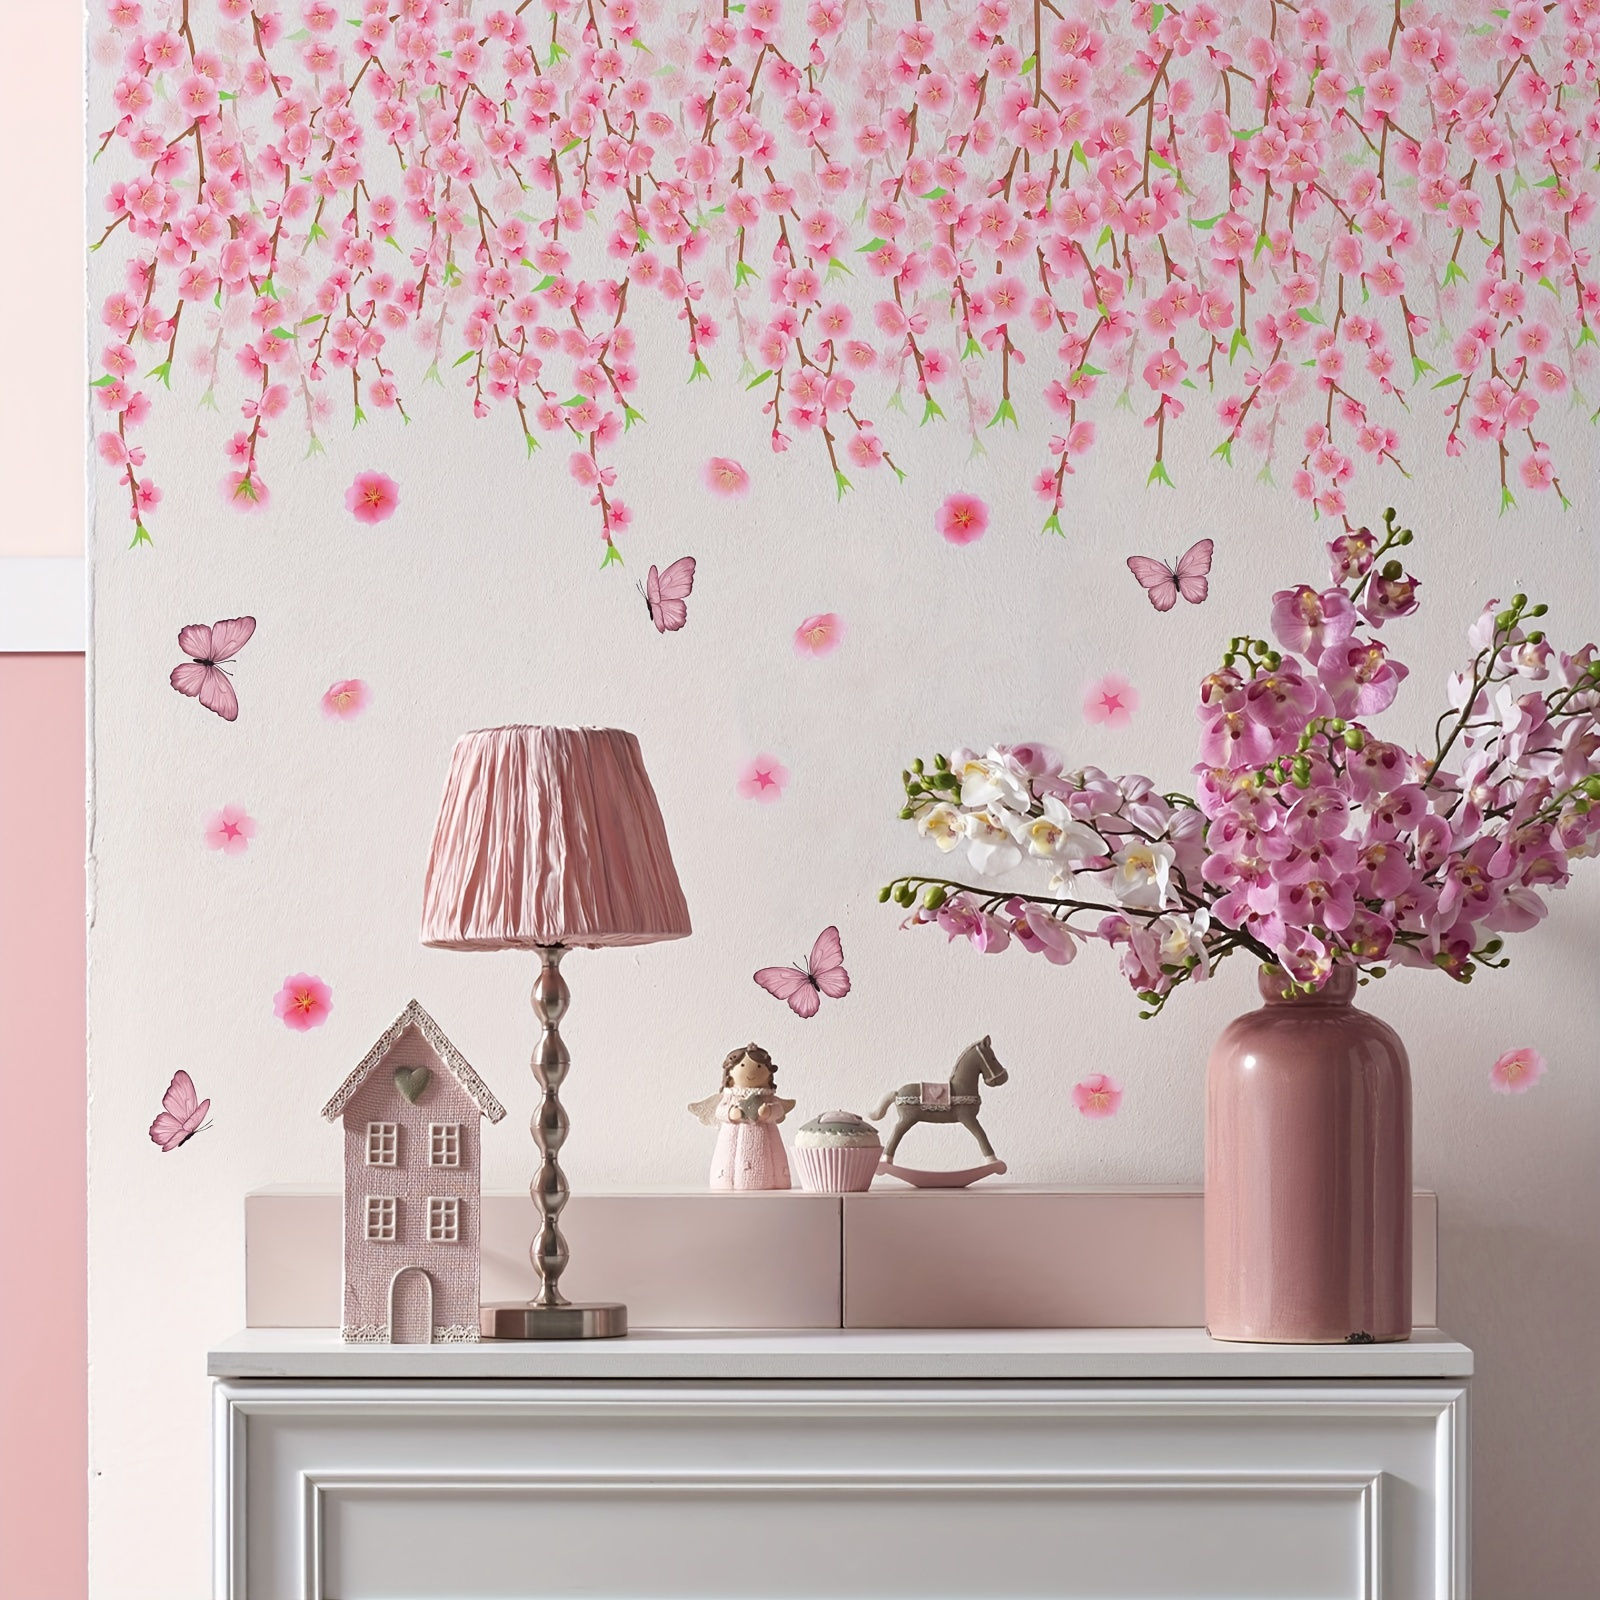 

1pc Pink Butterfly Flower Wall Decal For Living Room Bedroom Home Decor, Removable Self-adhesive Pvc Wall Sticker